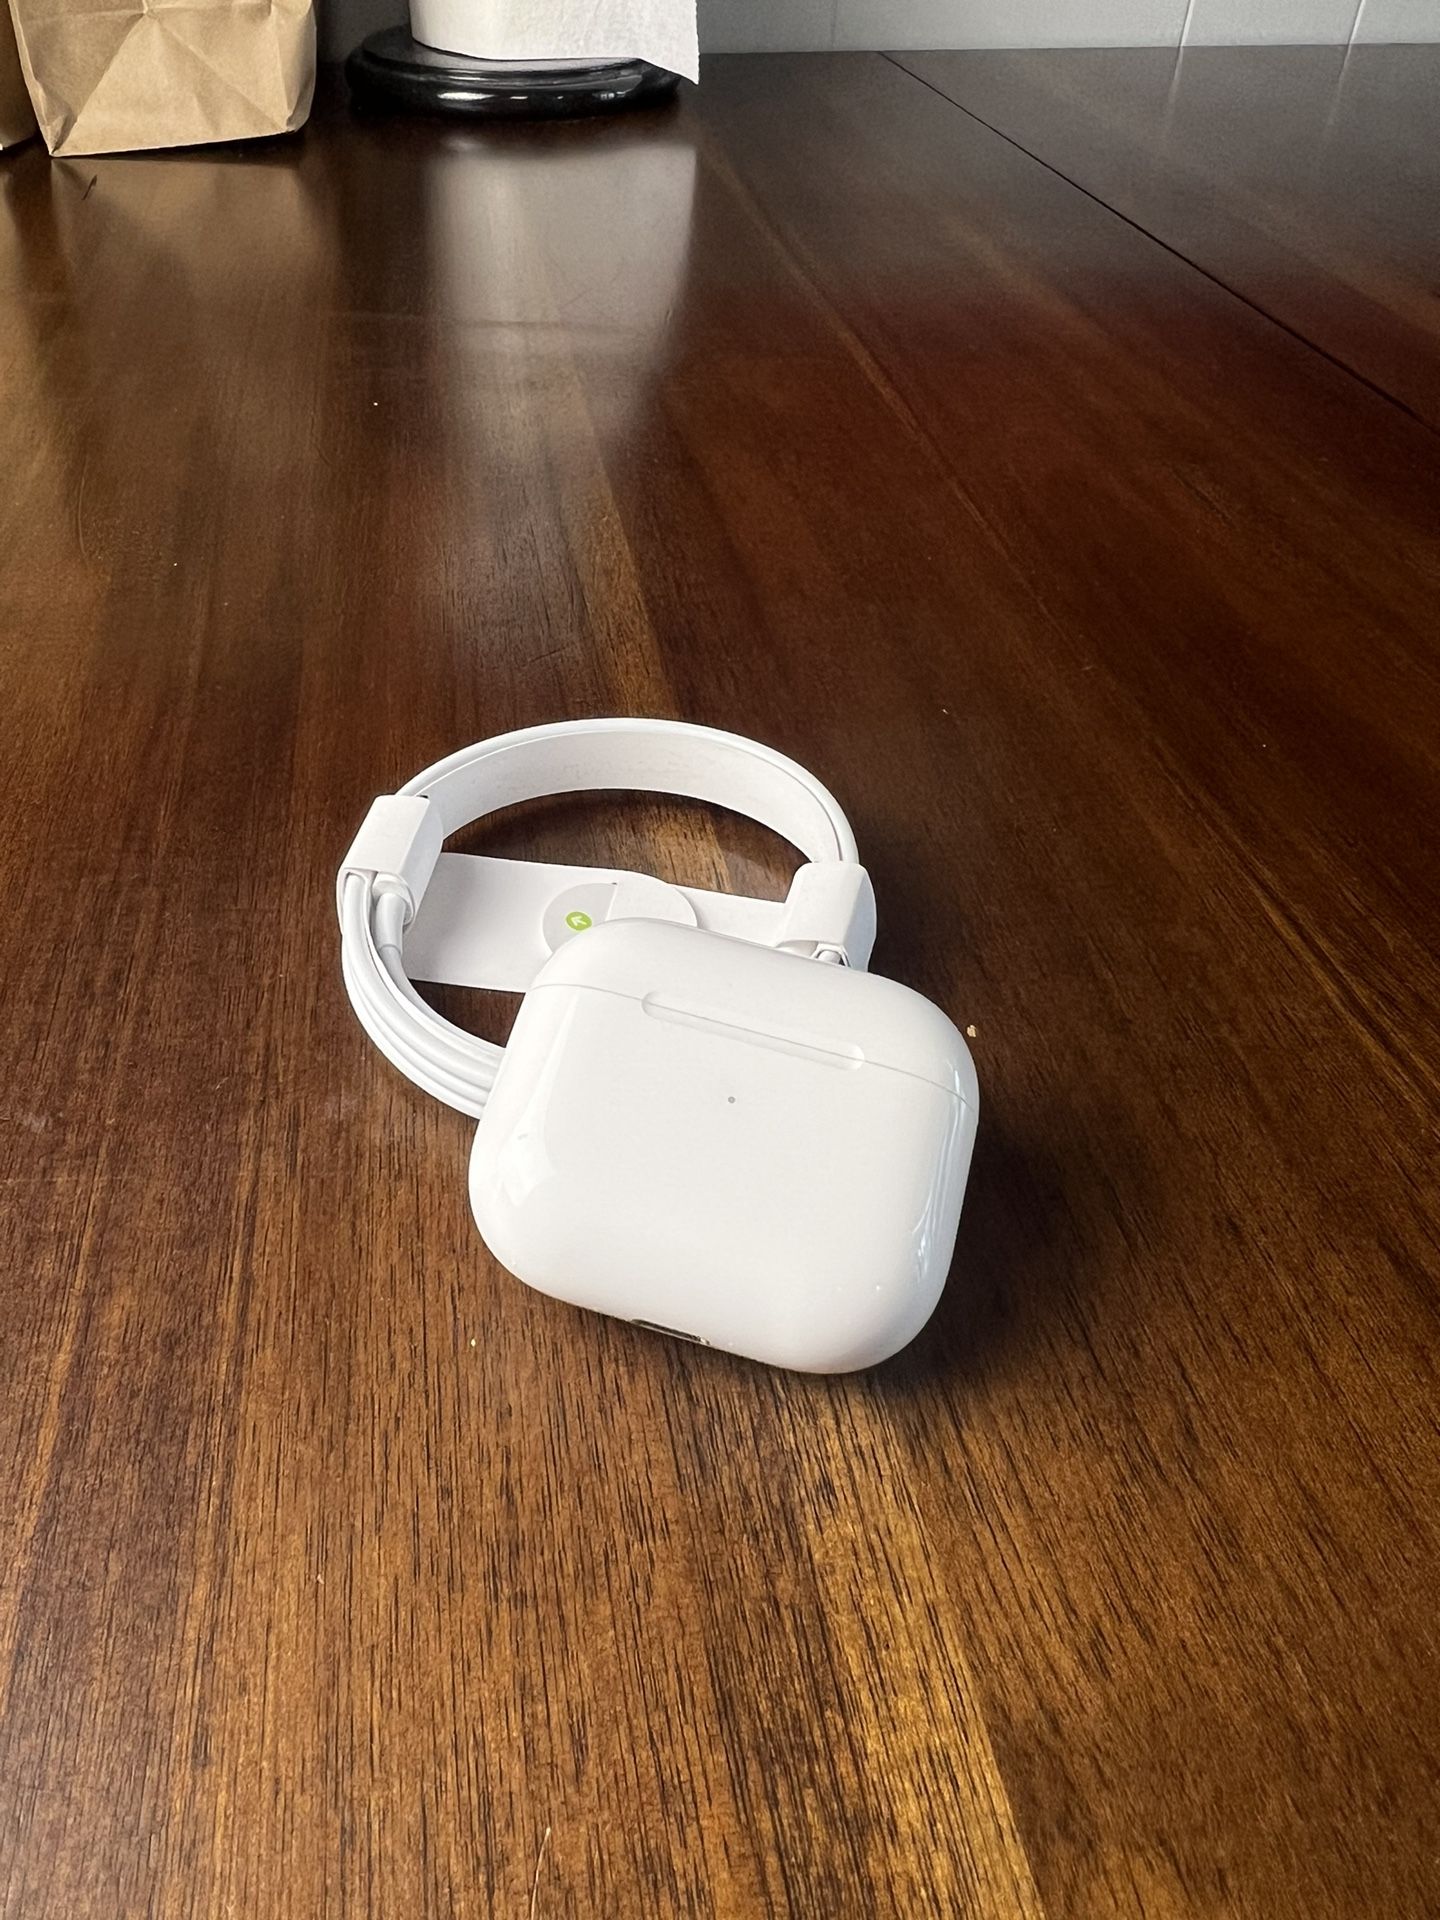 Airpod 3rd generation with lightning charger.